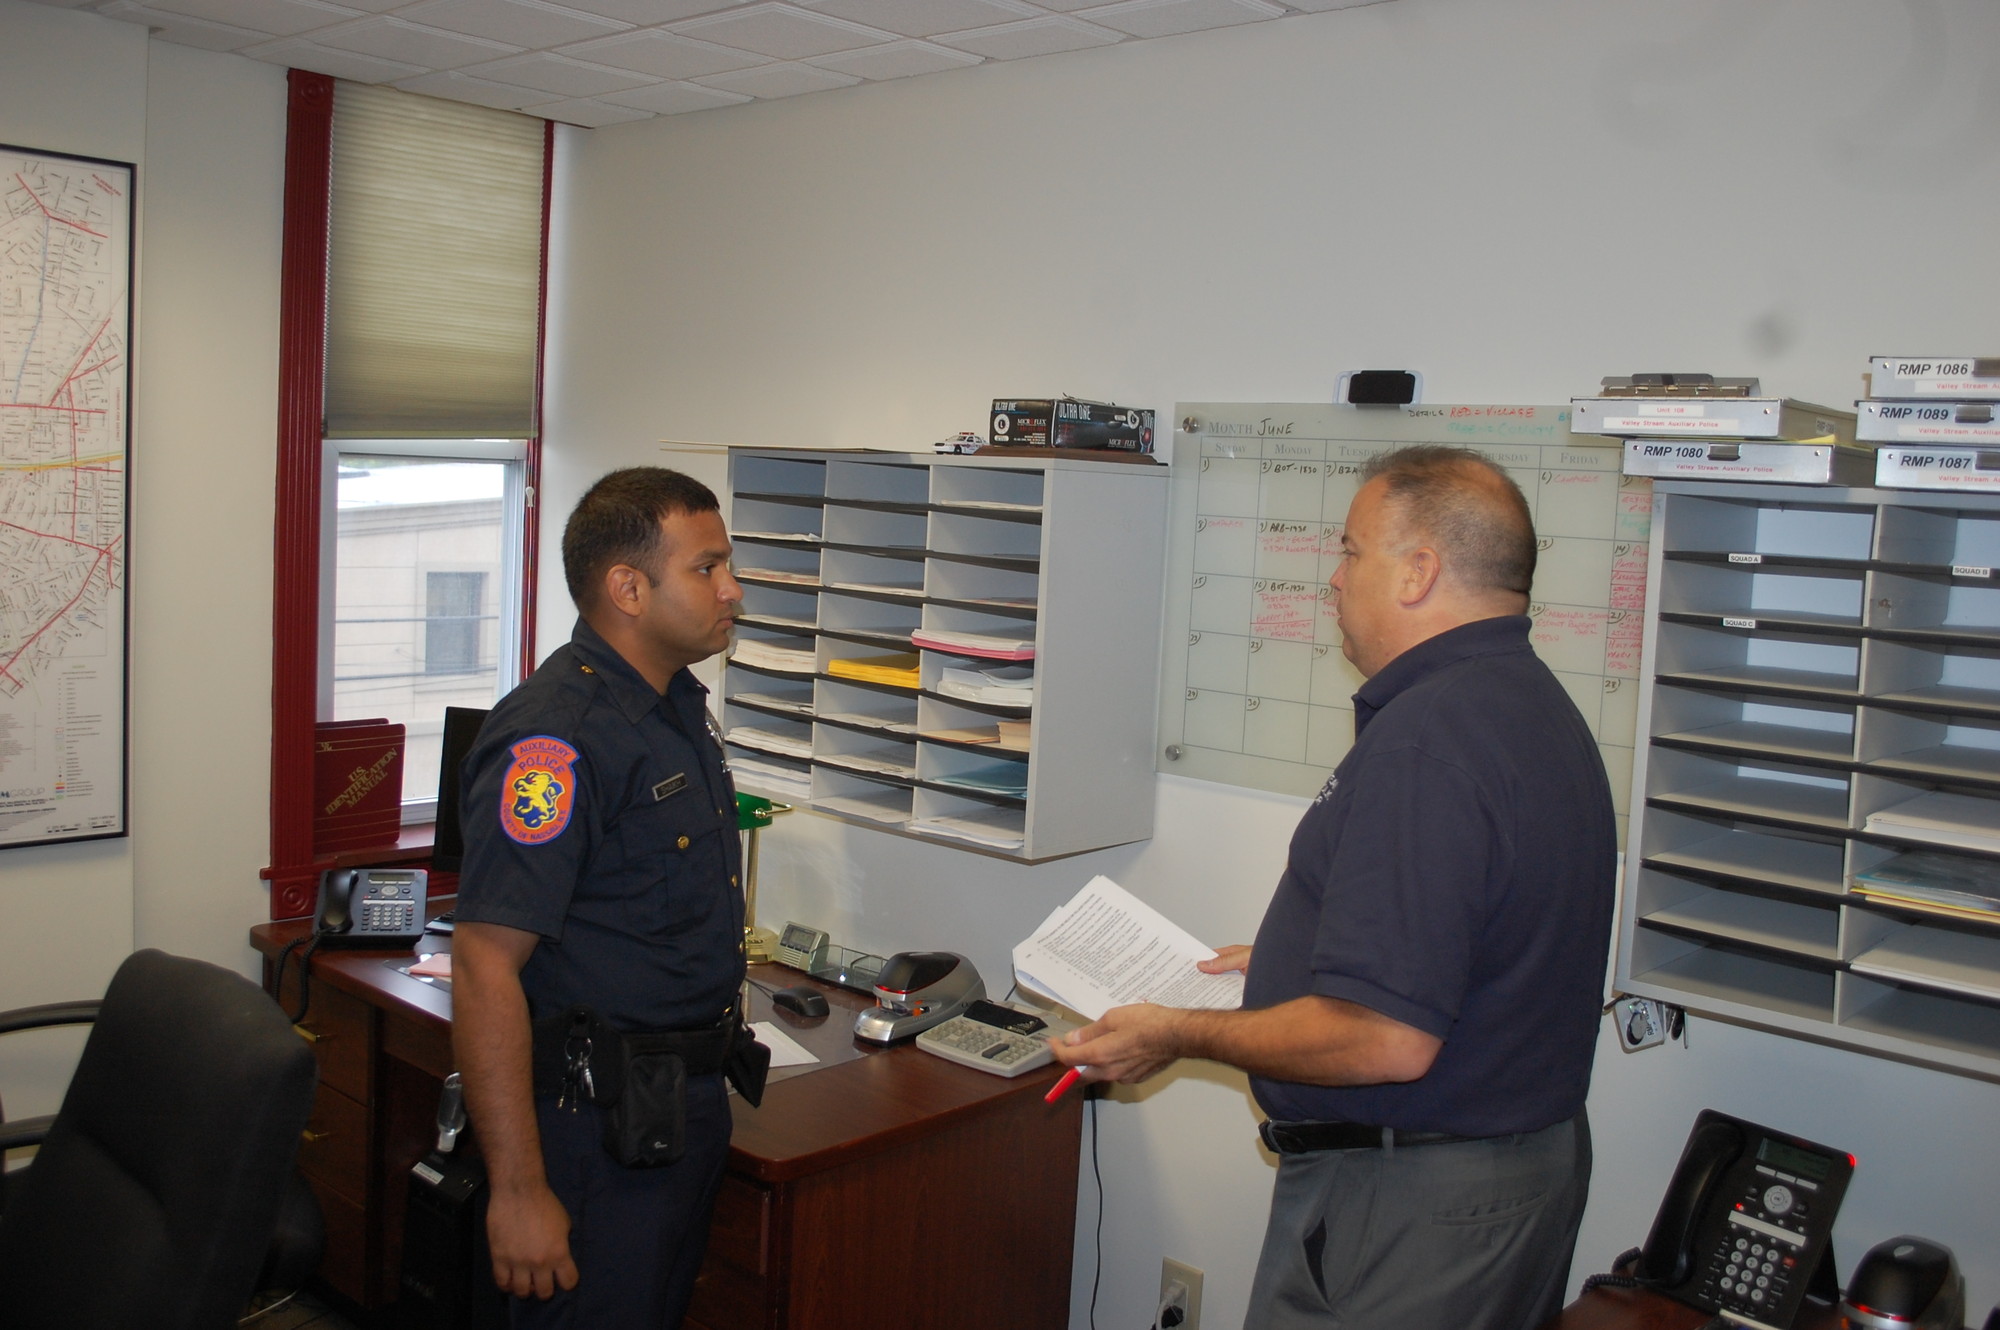 Auxiliary Police Officer Mohammed Shaikh, left, and Commander Richard Vela look over the schedule in their top floor office.